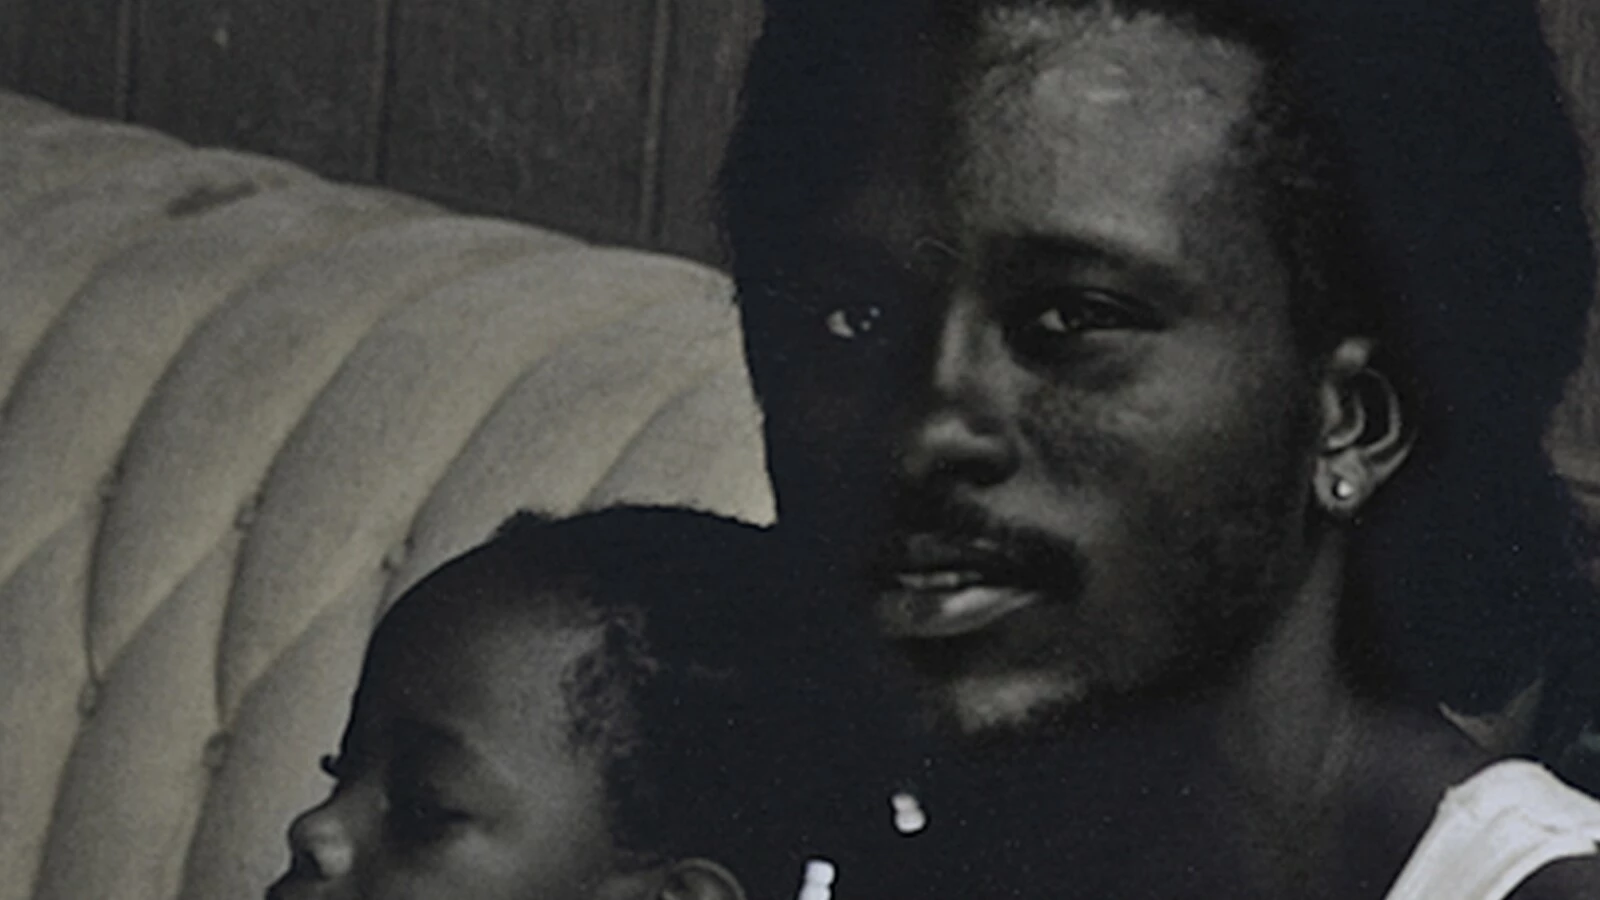 Black and white grainy image of a man with dark skin holding a small child on a couch